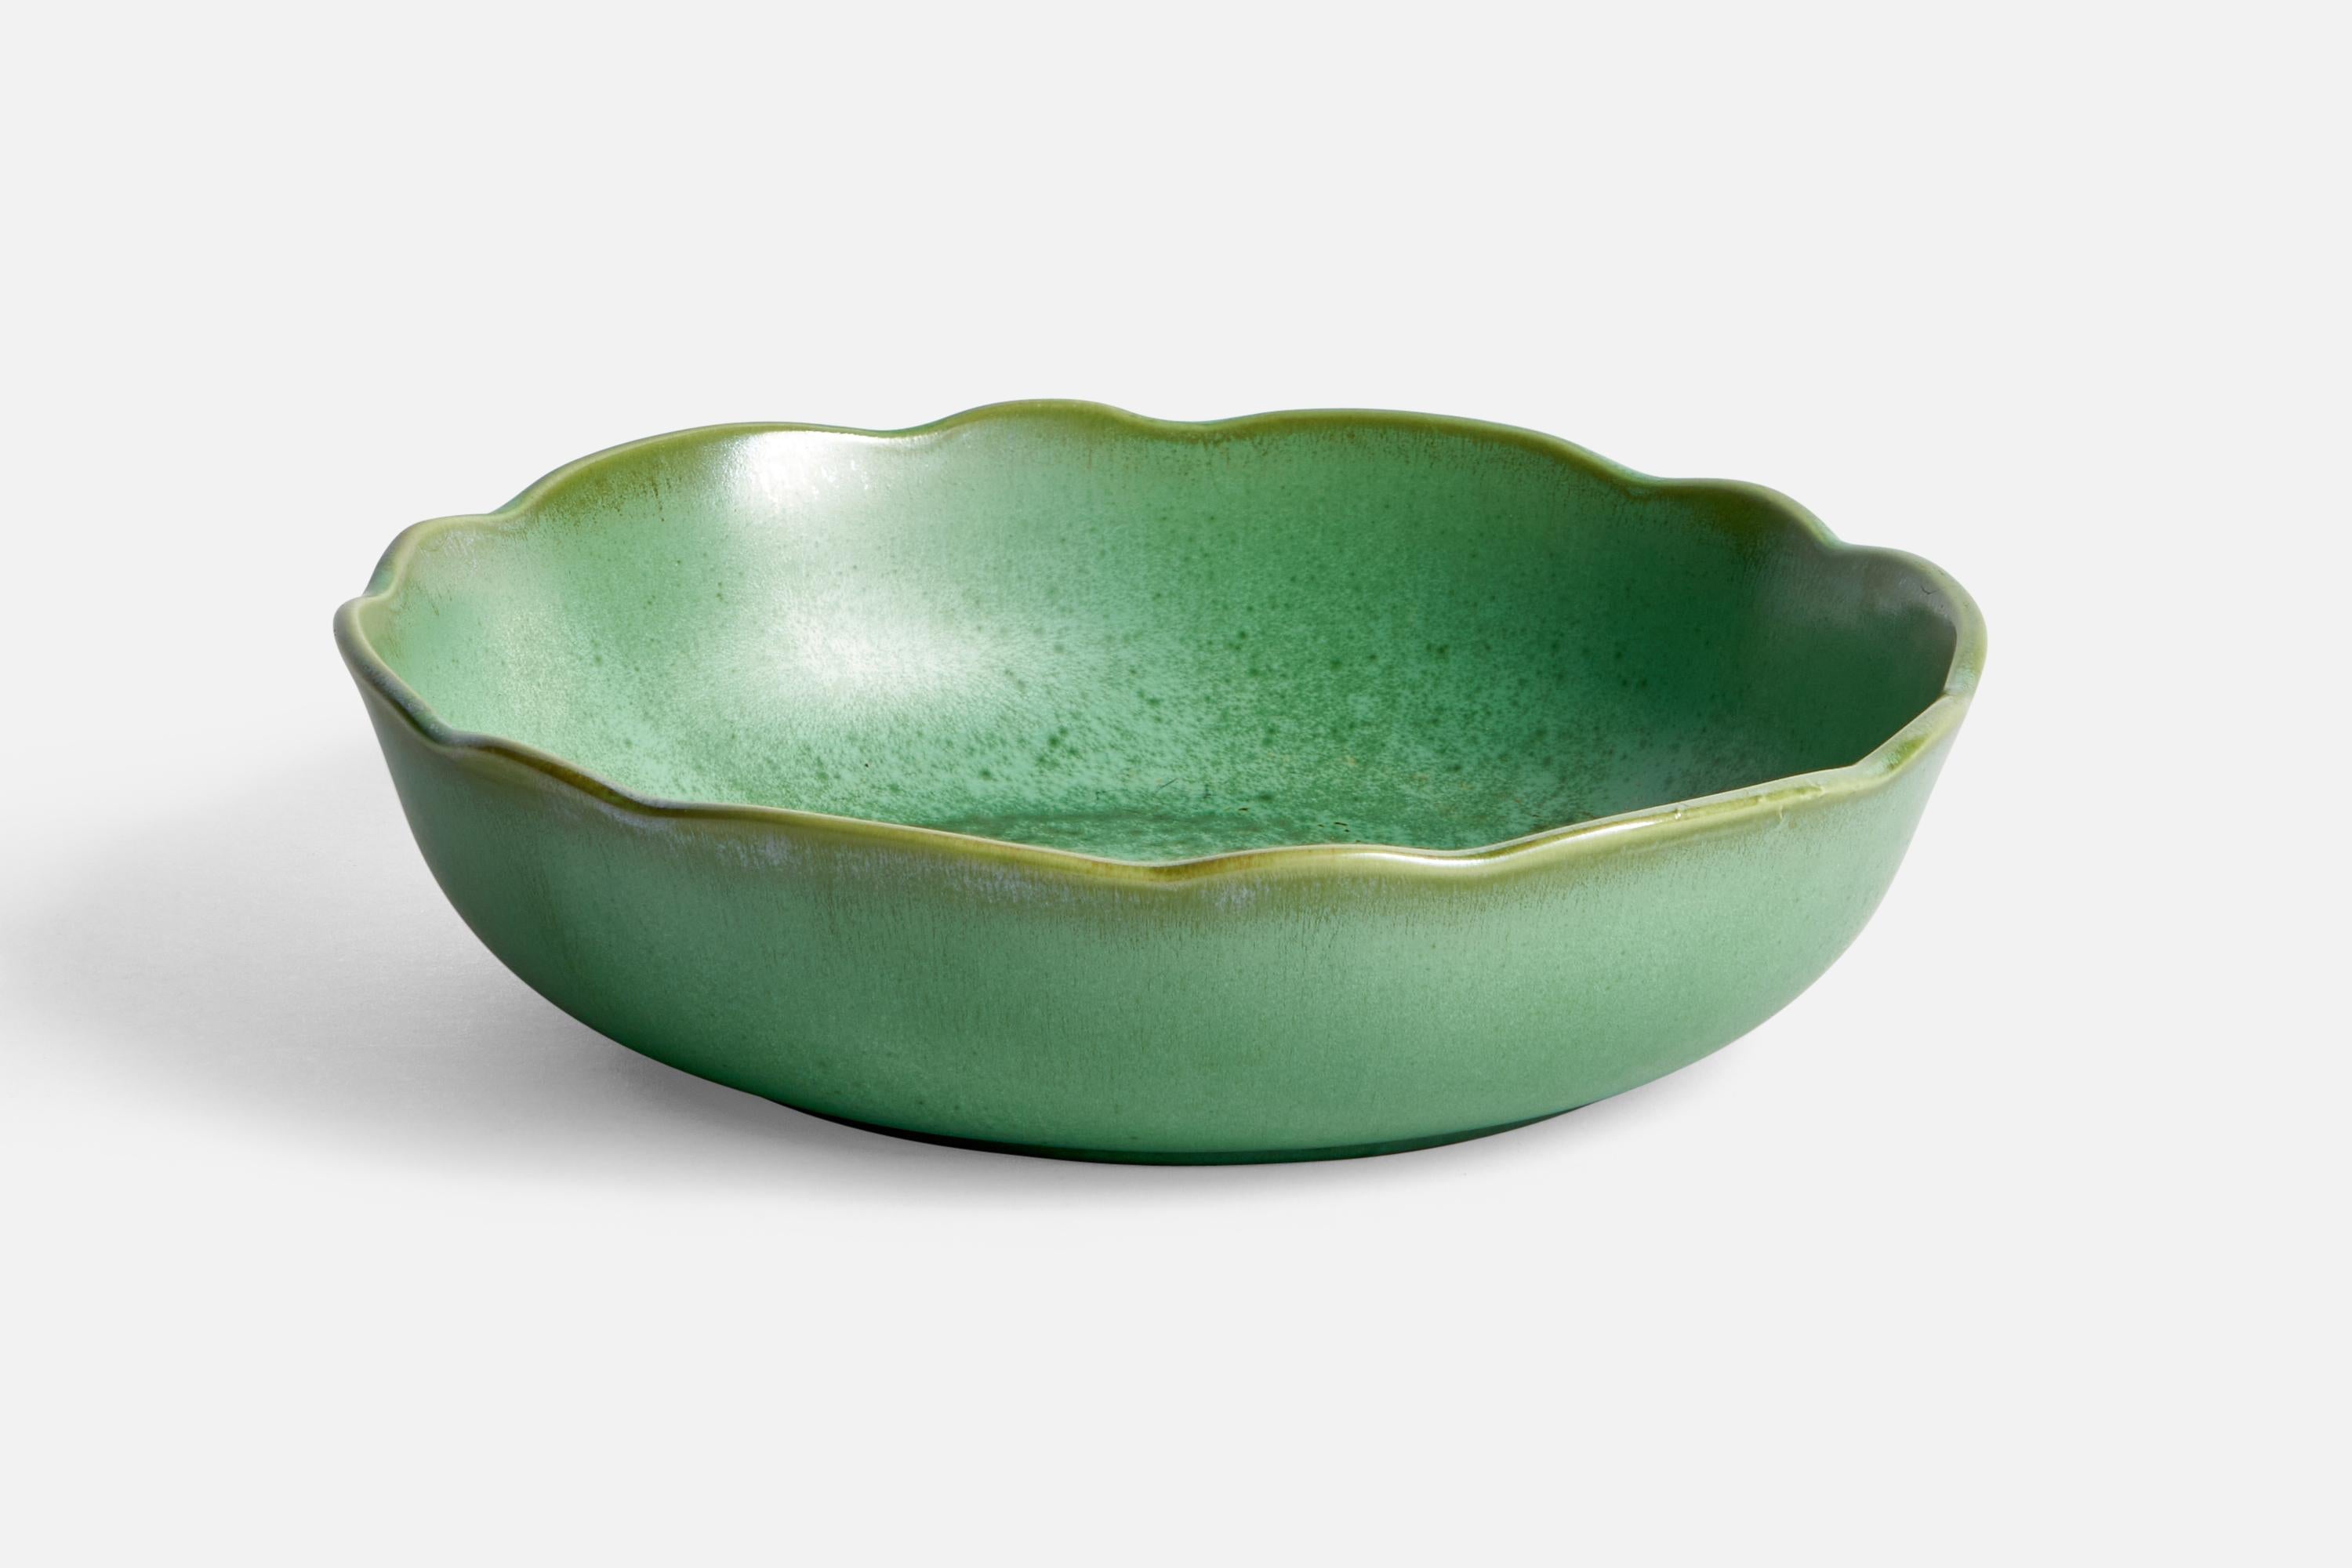 A green-glazed ceramic bowl designed by Arthur Percy and produced by Gefle, Sweden, c. 1930s.